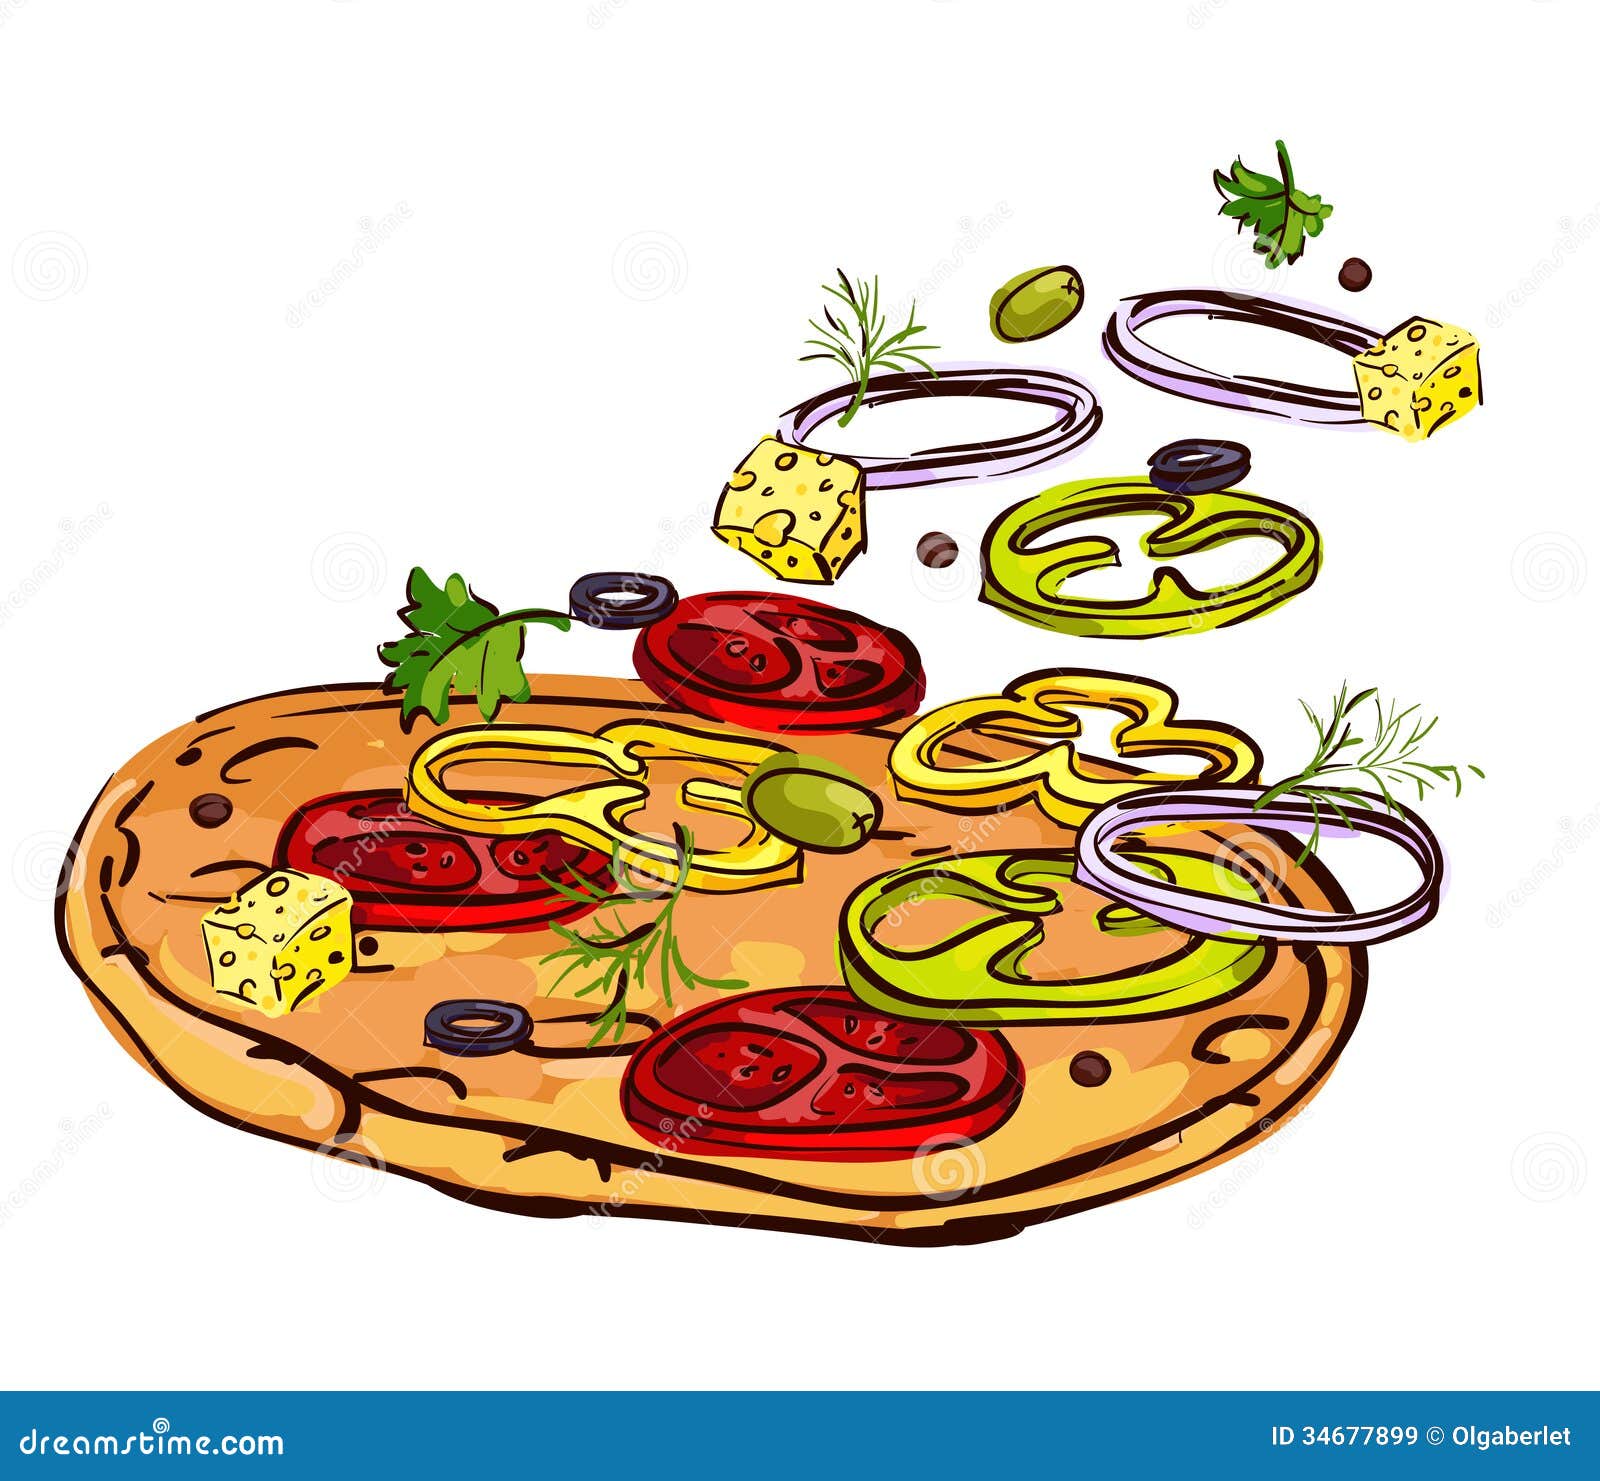 cheese pizza clipart free - photo #50